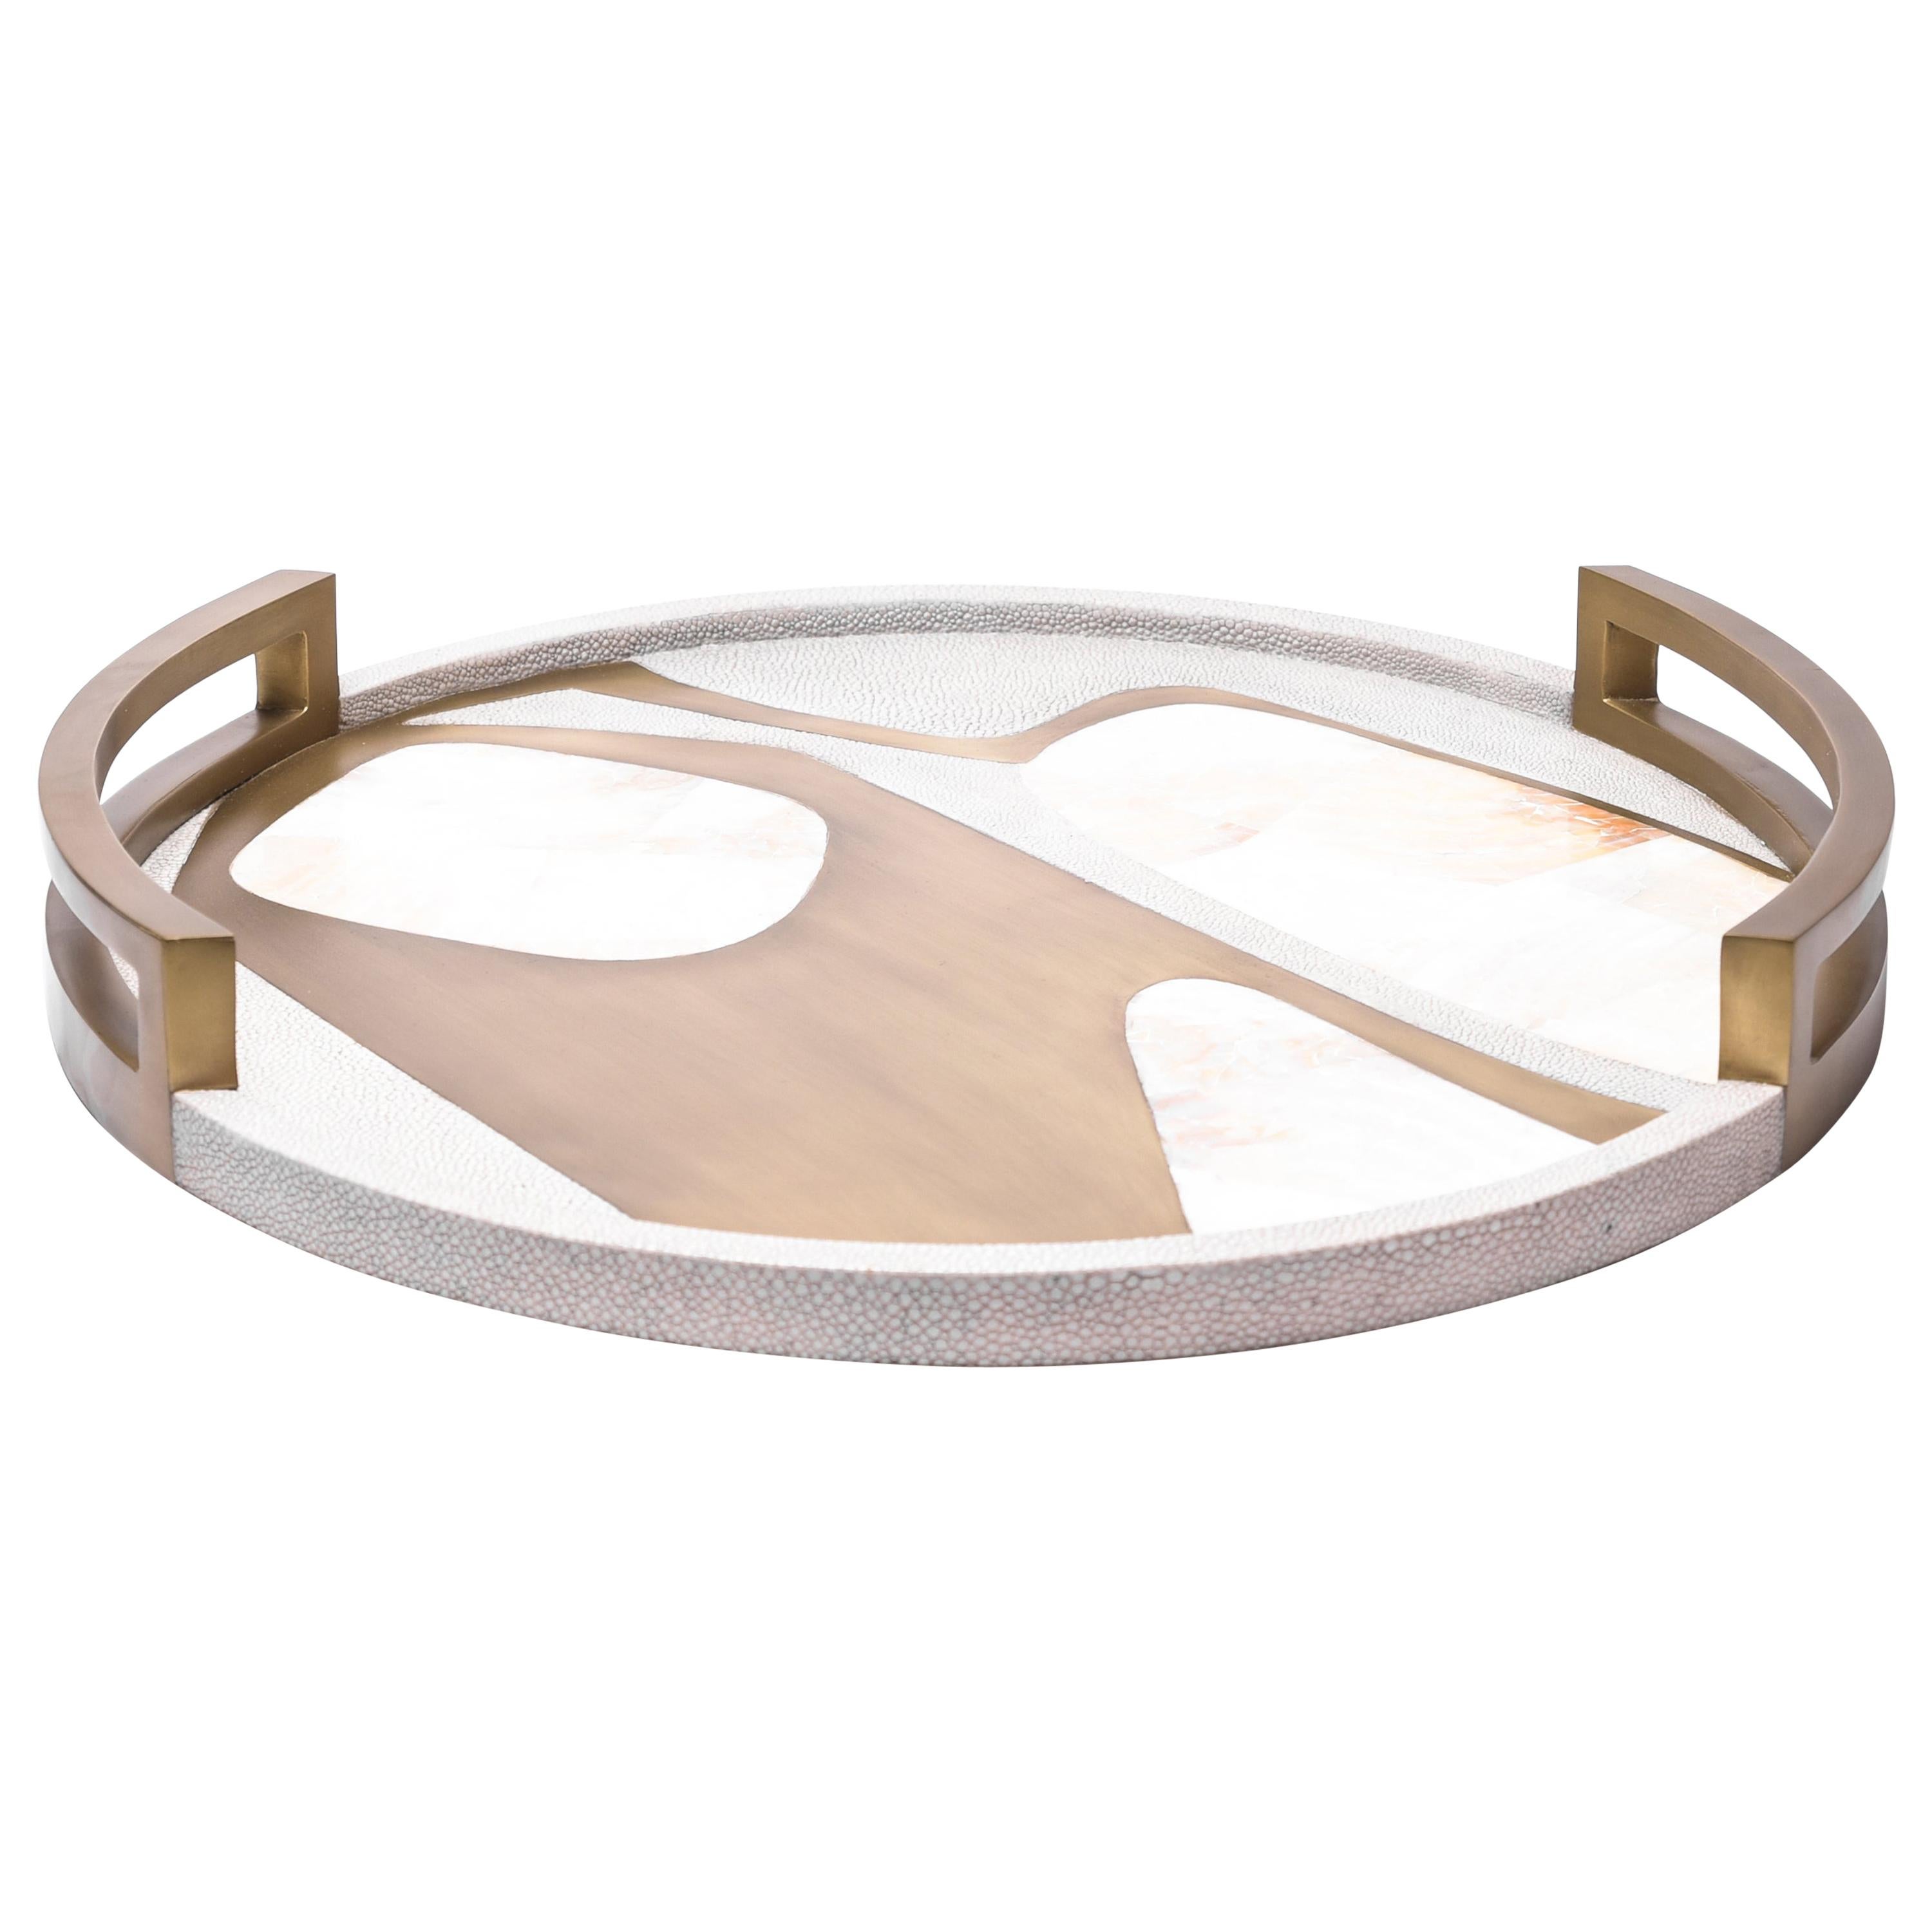 Circular Cosmos Tray in Cream Shagreen, White Shell and Brass by R&Y Augousti